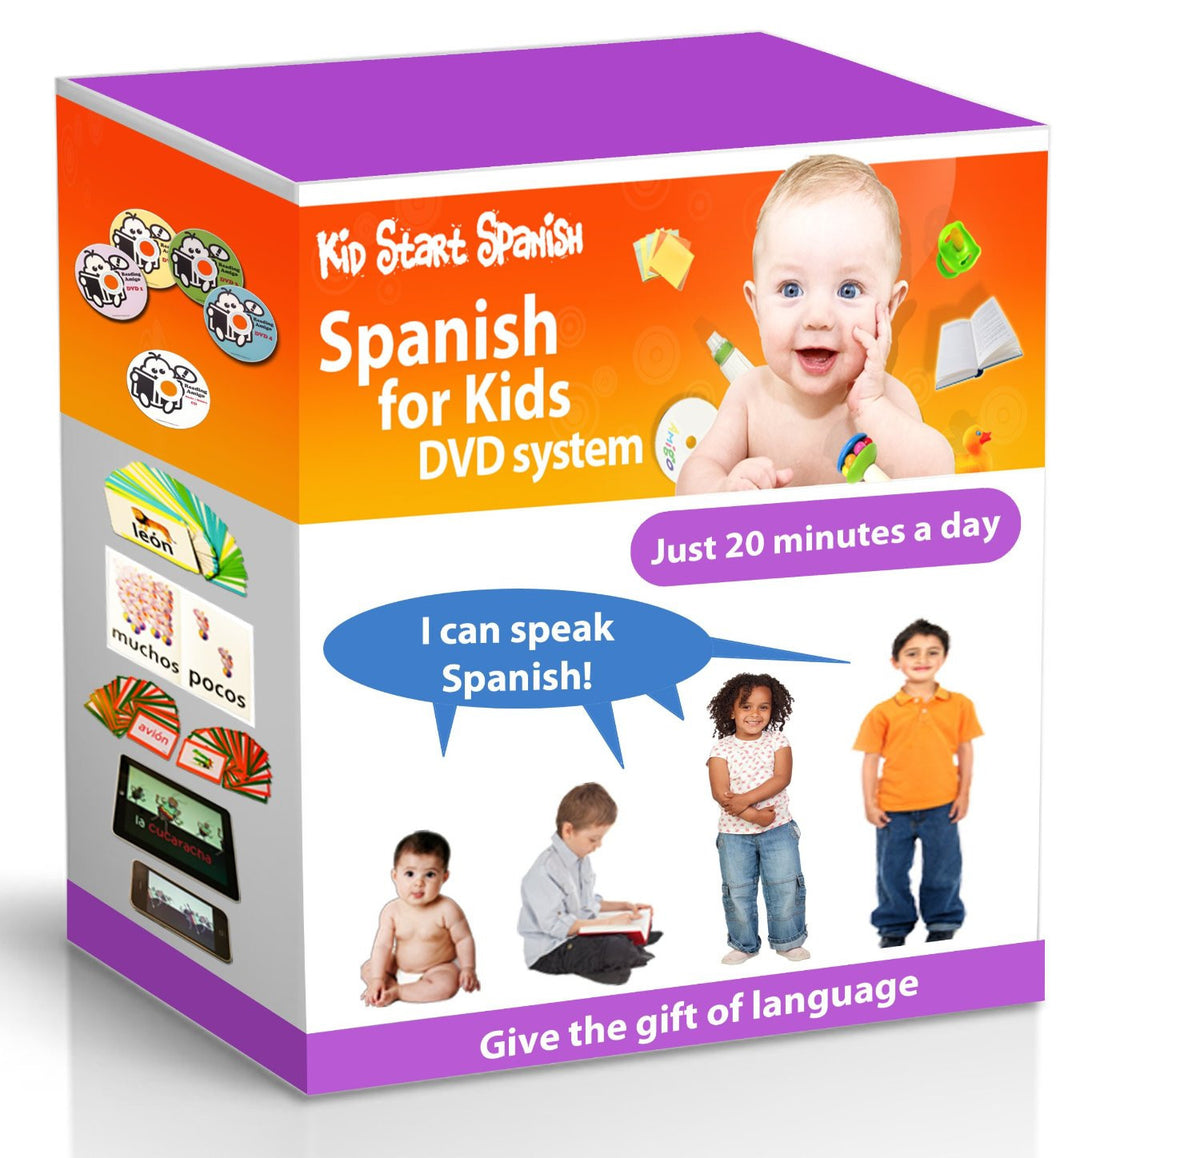 SPANISH FOR KIDS: Early Language Learning System (Spanish in just 20 minutes) Kid Start Spanish - 4 DVDs + Music CD + Large Book + 50 Flashcards + Games + Apps included - Teacher In Spanish